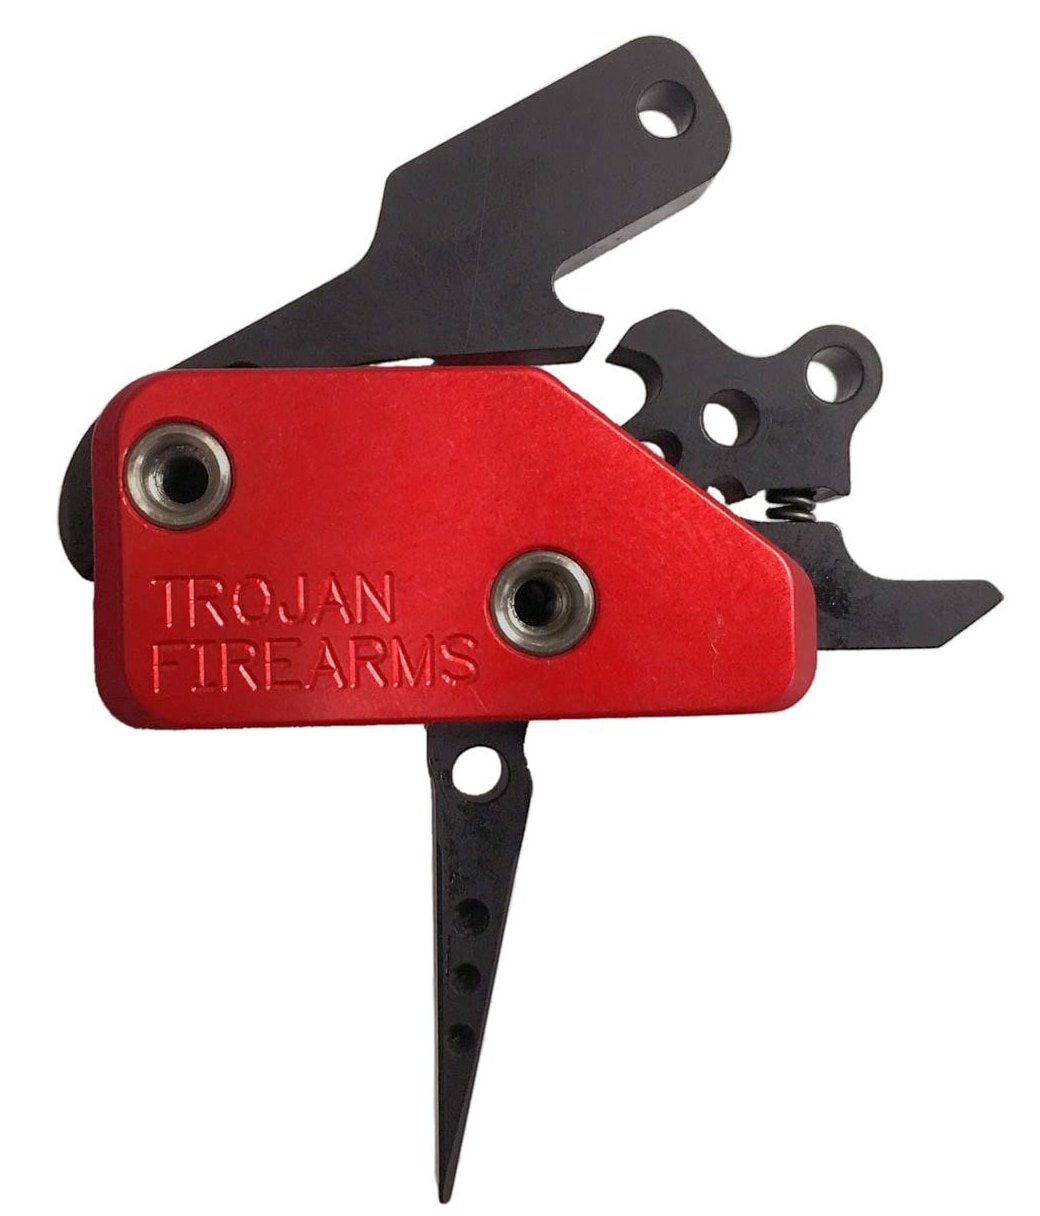 The TFA-15S is a drop-in trigger designed for the AR-15 platform. (Photo: Trojan Firearms)